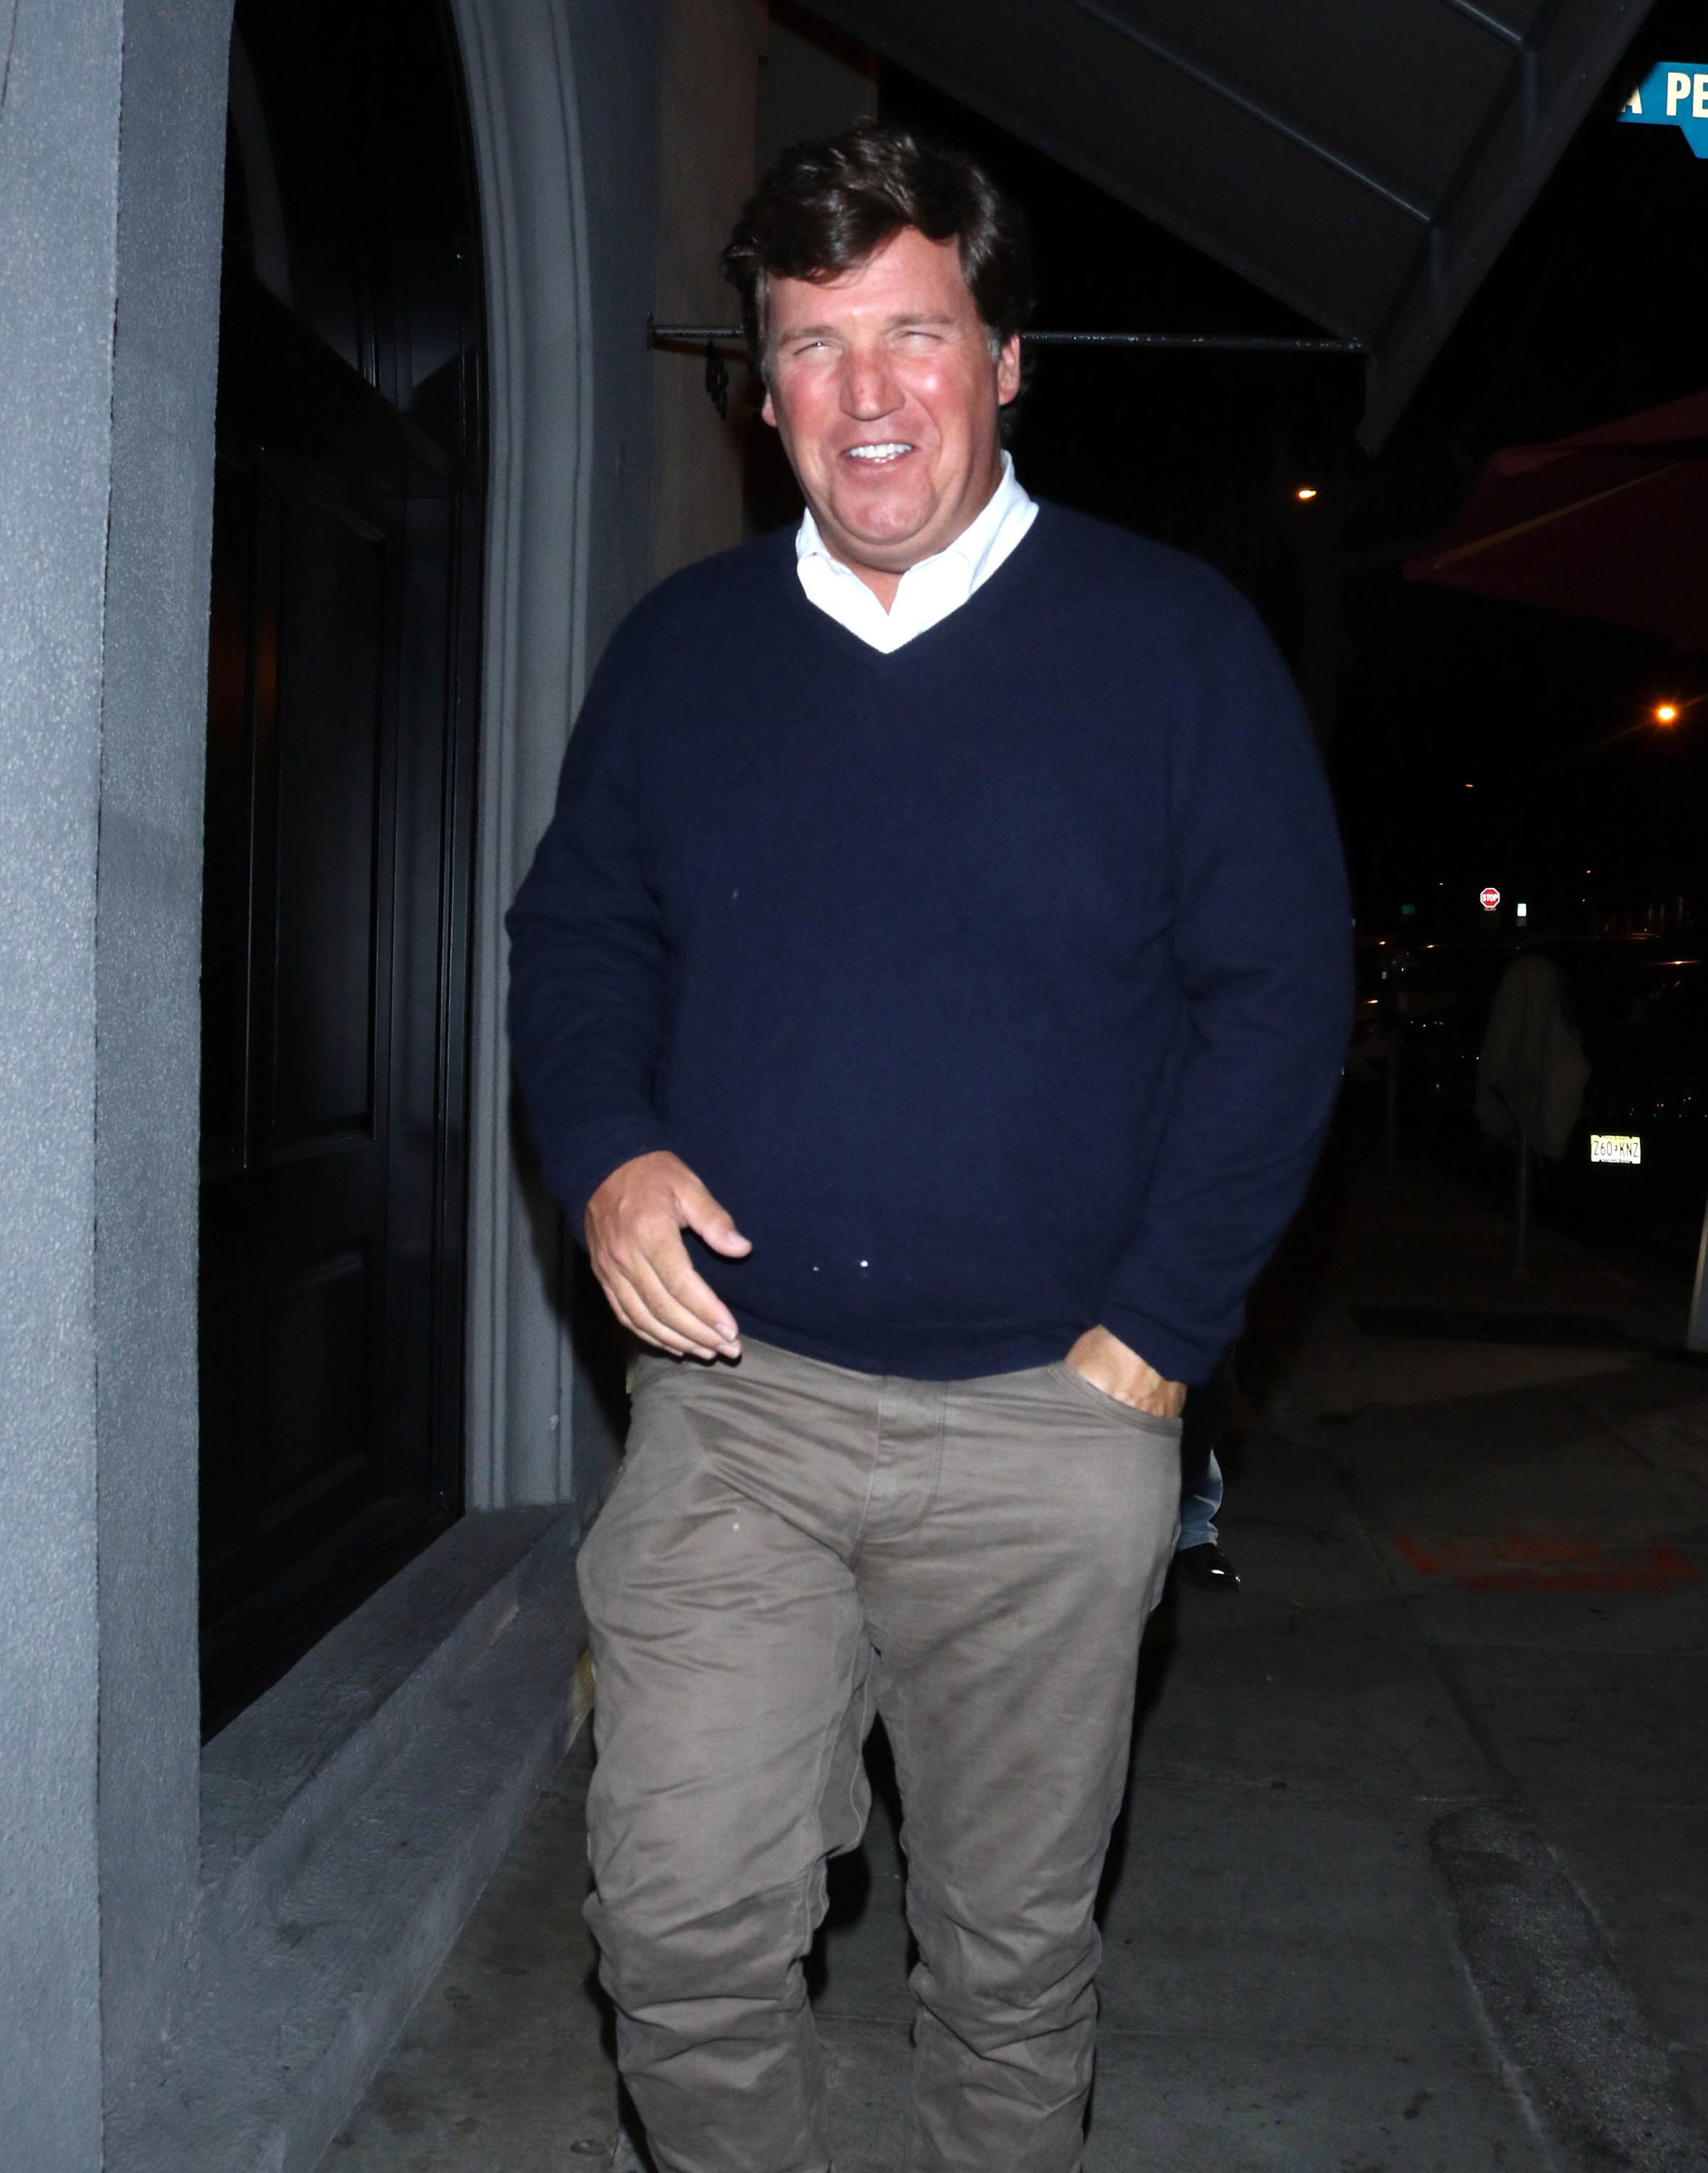 Tucker Carlson is seen on January 15, 2020, in Los Angeles, California | Source: Getty Images